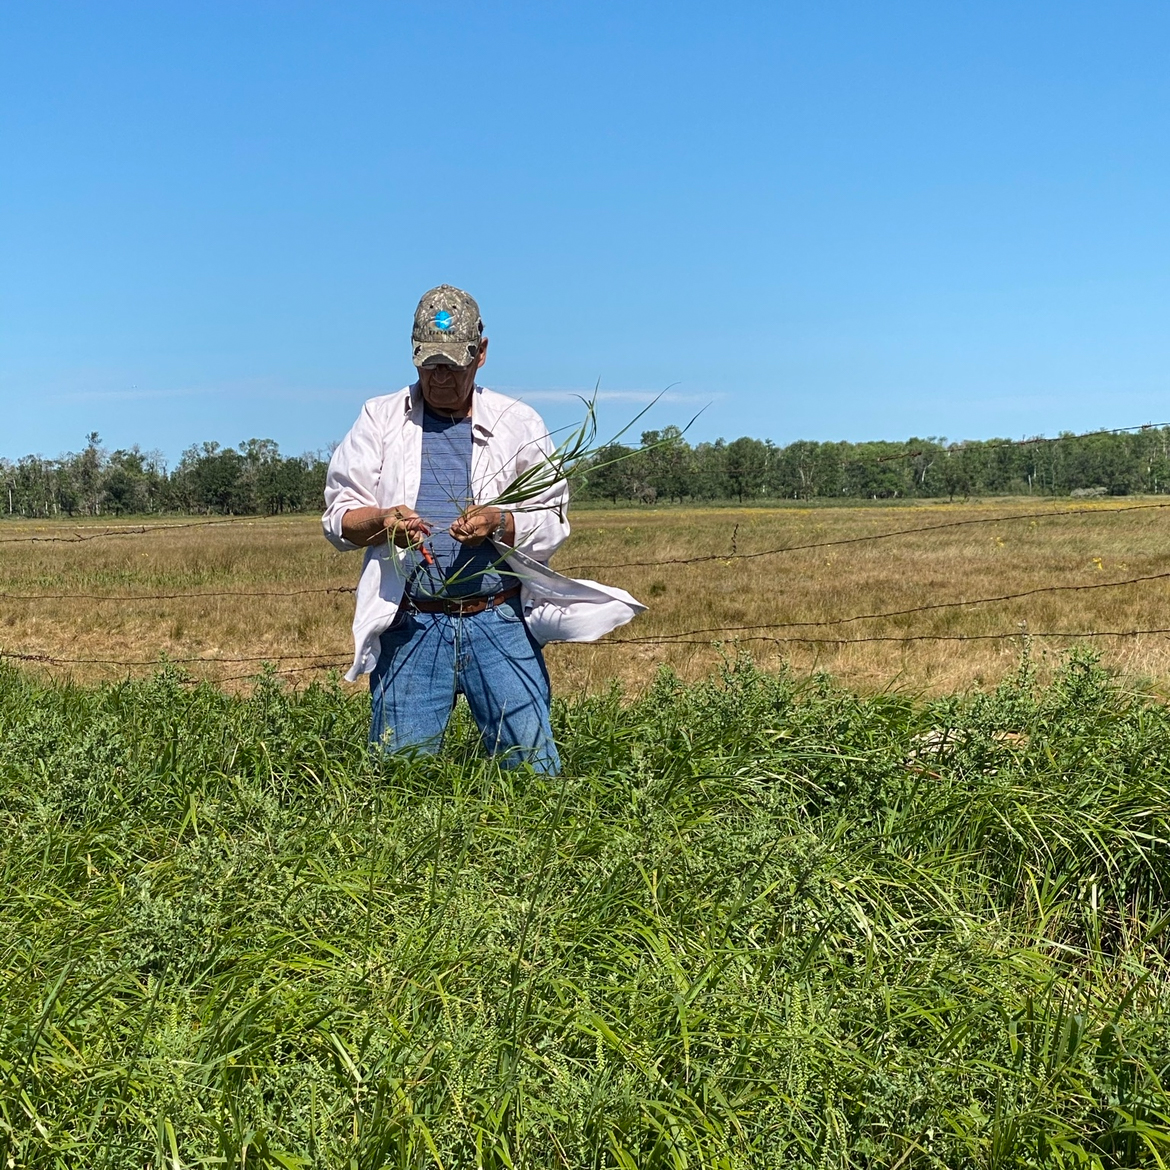 An elder man named Joe Campbell is standing in a field, busily weaving sweetgrass. The sky is clear and blue above him, and the vast fields in the background suggest a peaceful, rural setting. Joe is wearing a white shirt, blue jeans, a belt, and a cap adorned with a turquoise emblem. The green sweetgrass in his hands contrasts with the golden hues of the distant field.